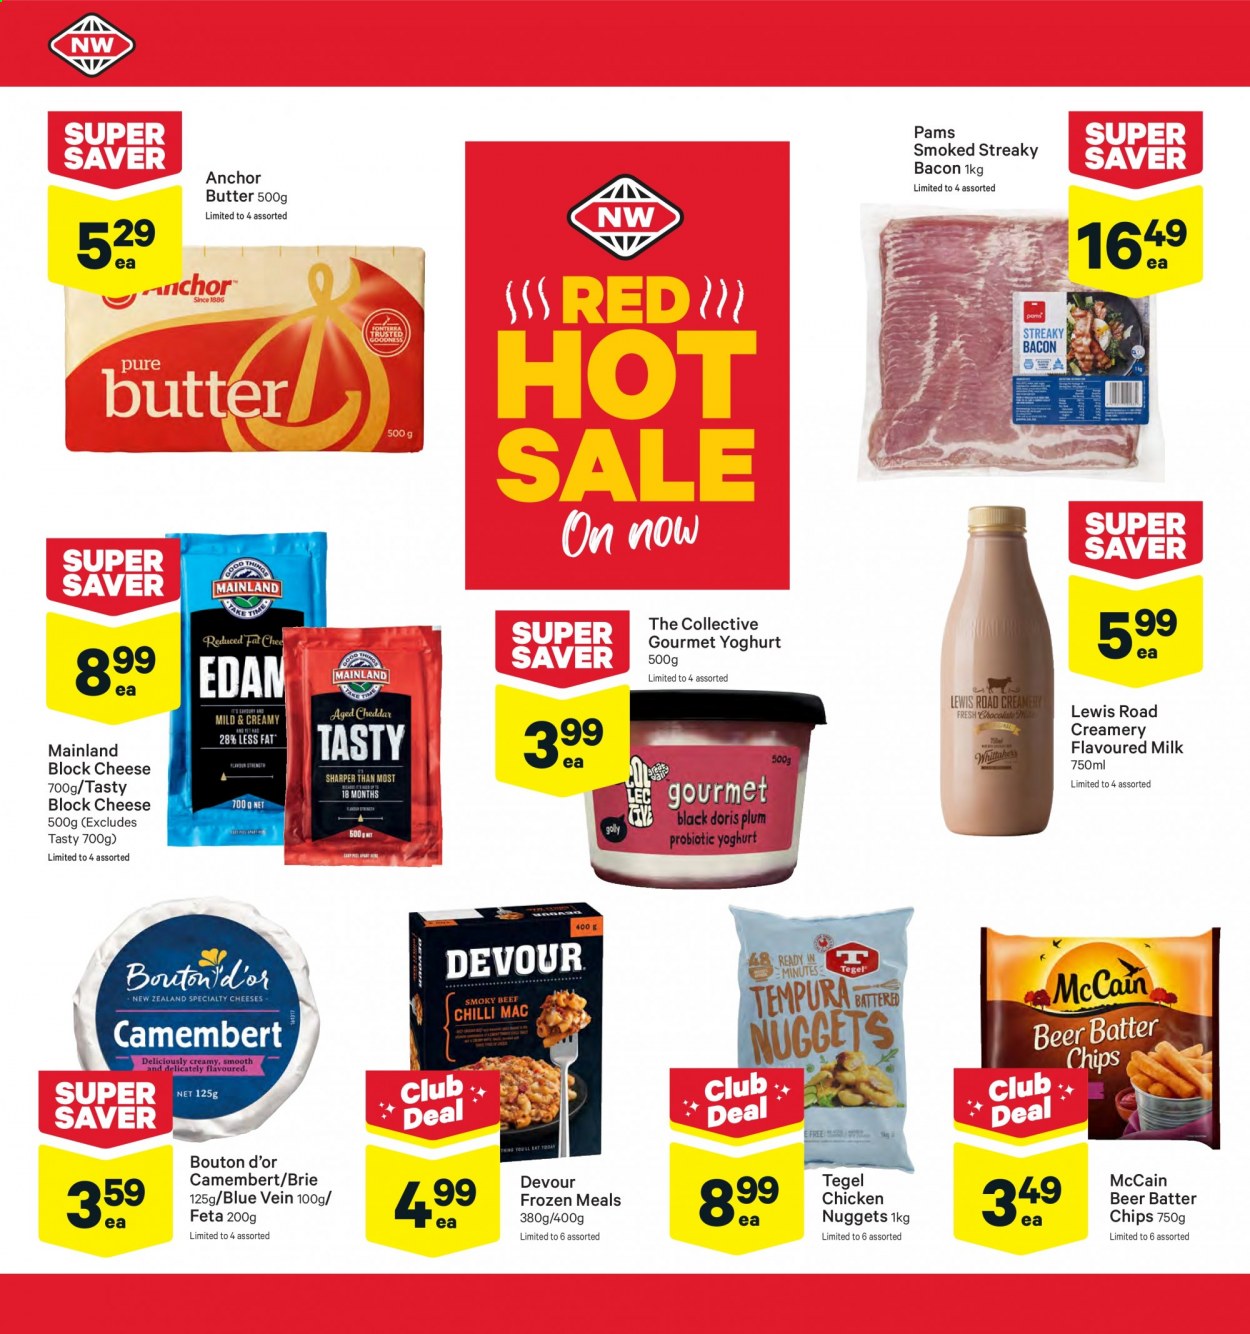 thumbnail - New World mailer - 30.08.2021 - 05.09.2021 - Sales products - nuggets, bacon, streaky bacon, camembert, cheese, brie, feta, yoghurt, probiotic yoghurt, milk, flavoured milk, butter, Anchor, Devour, McCain, chocolate, beer. Page 4.